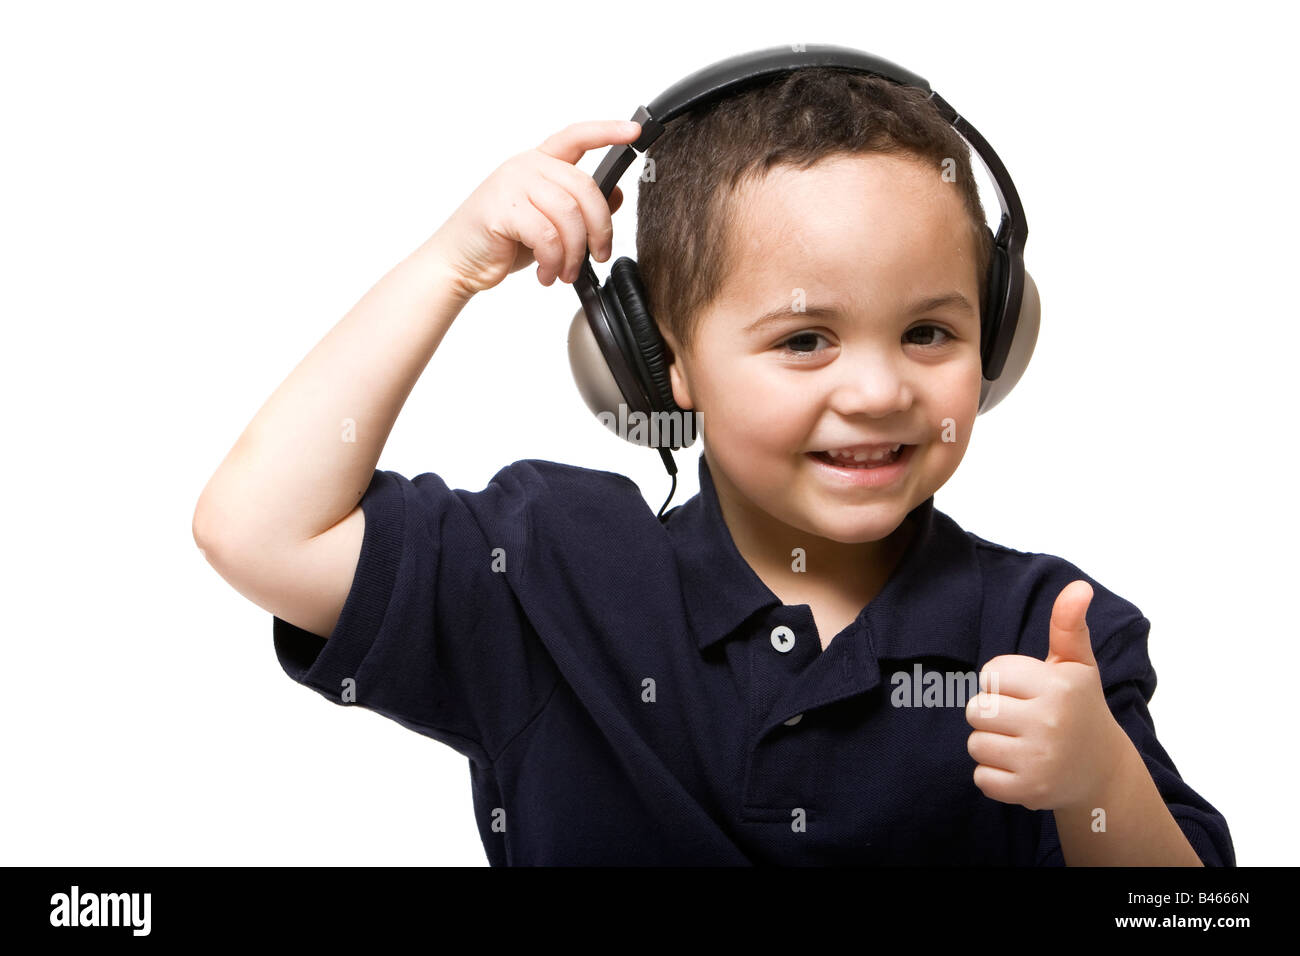 Young boy removing headphones giving thumbs up sign Stock Photo